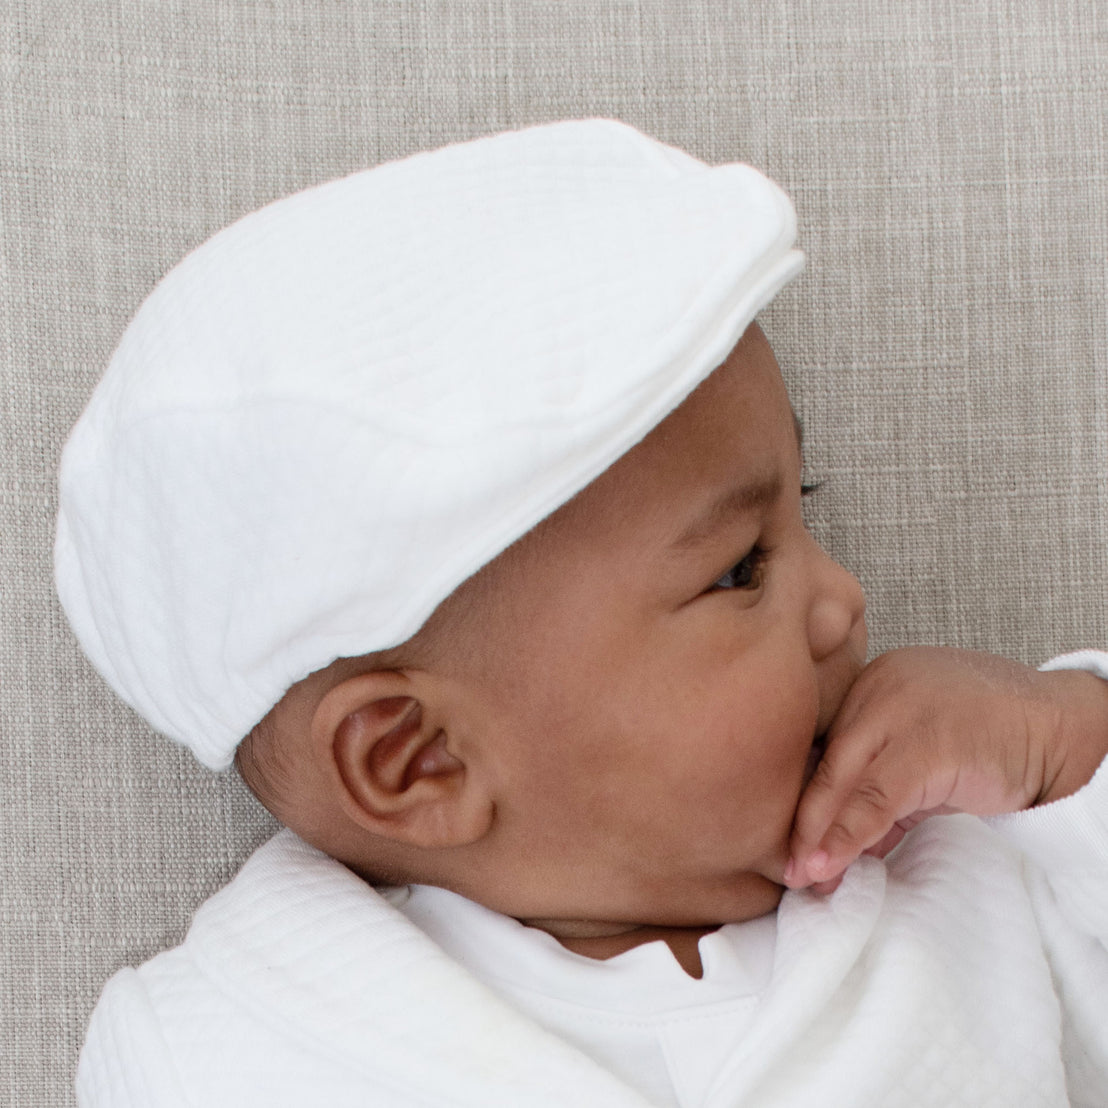 Baby boy wearing the Elijah Newsboy Cap. The photo shows the side view of the Newsboy Cap showing the soft elastic that ensures a nice, comfortable fit